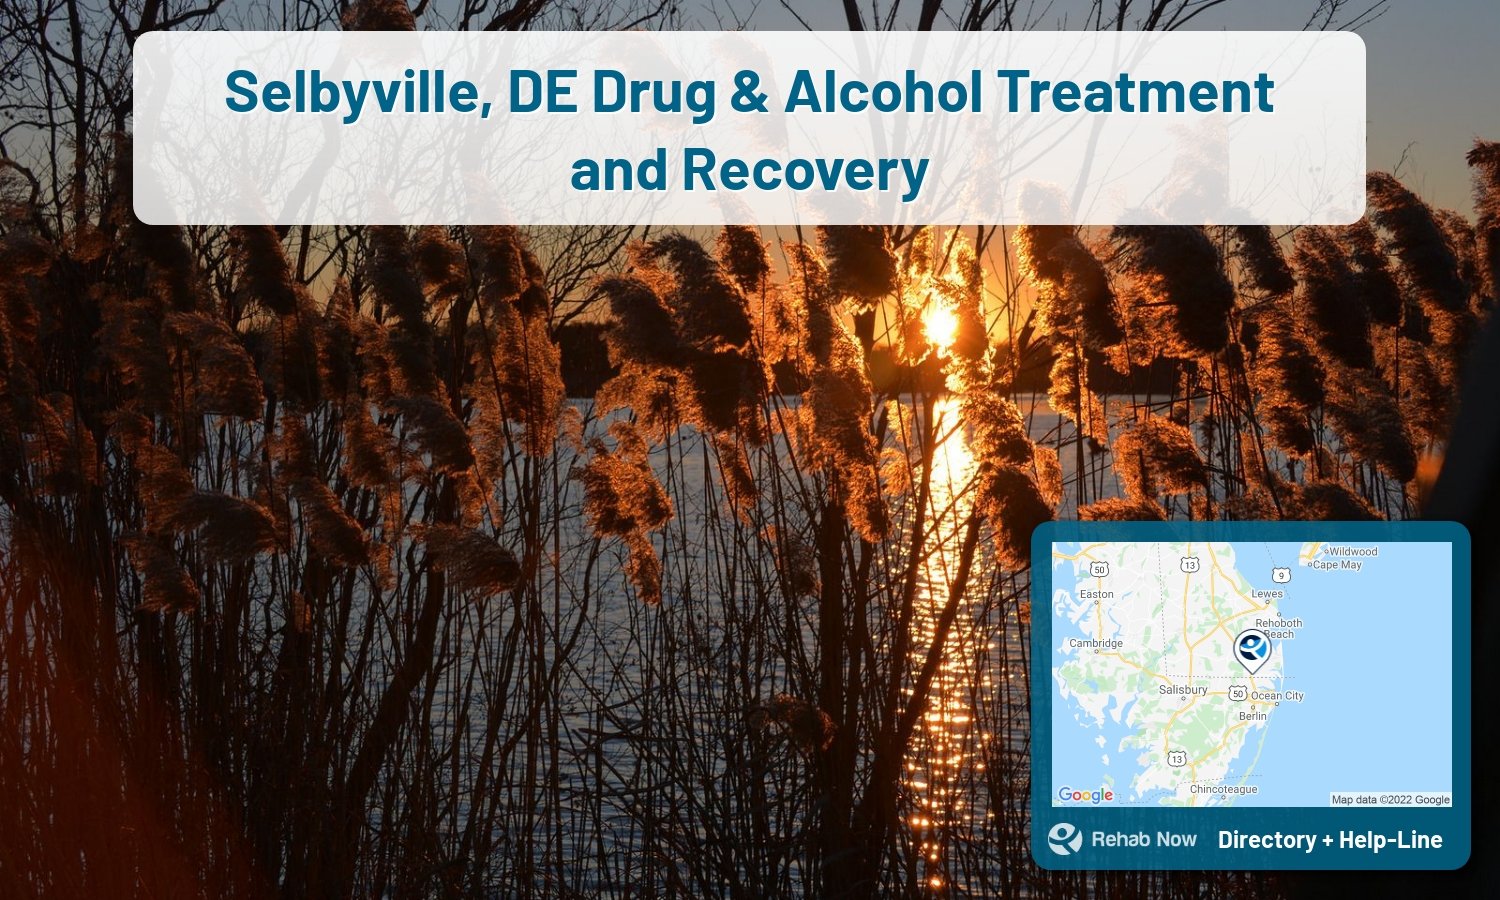 List of alcohol and drug treatment centers near you in Selbyville, Delaware. Research certifications, programs, methods, pricing, and more.